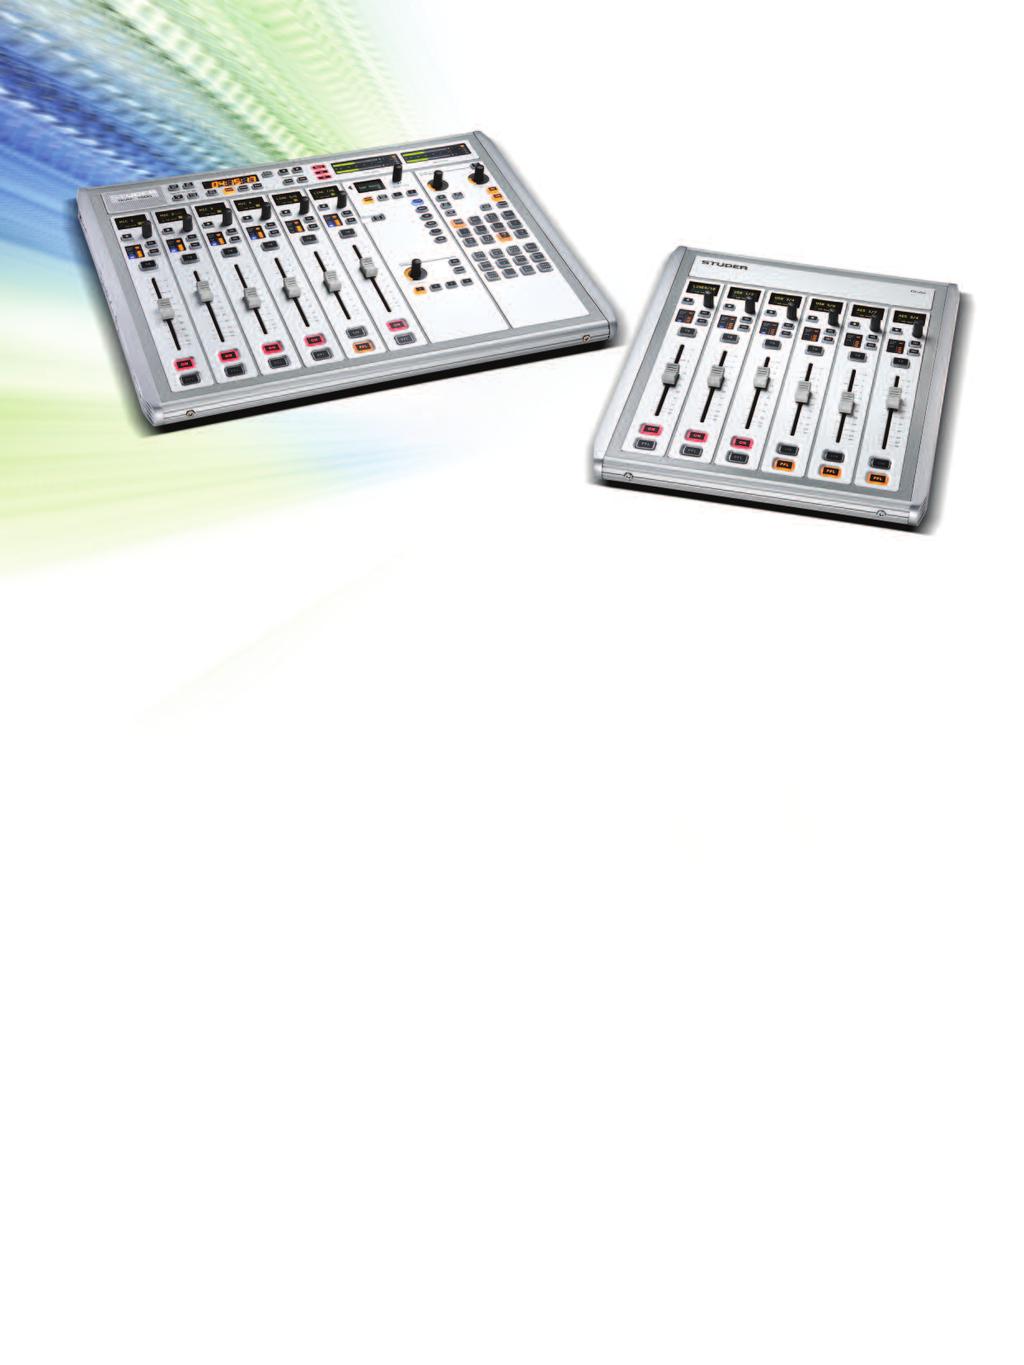 The OnAir 1500 can be used to mix up to 12 channels.